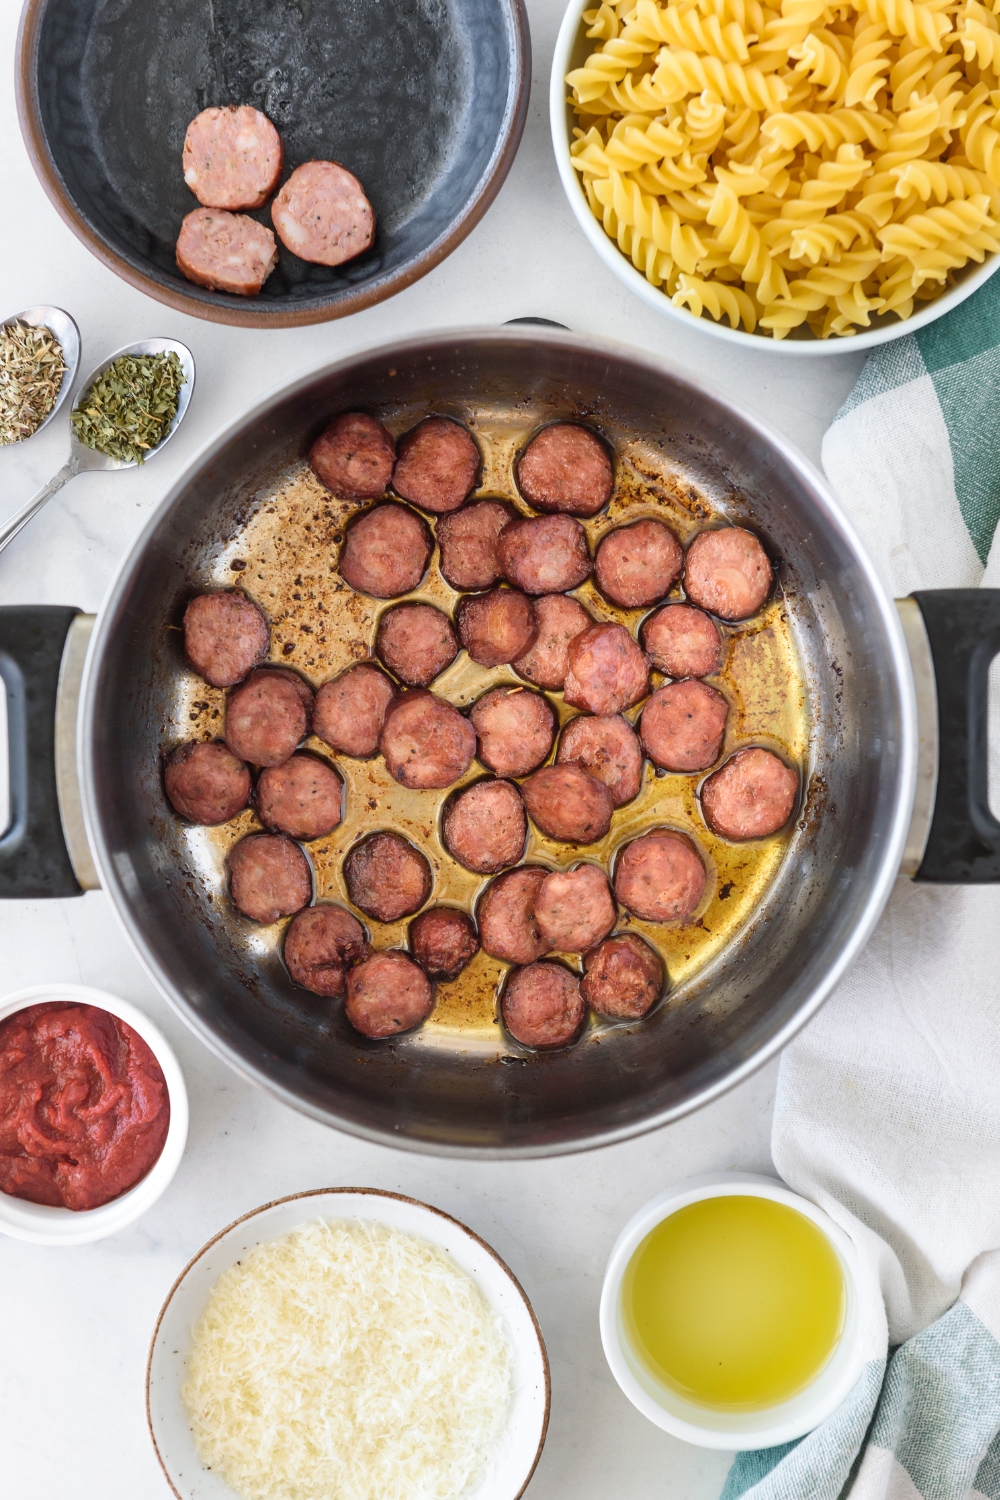 A pot with sausage slices cooking in it. The pot is surrounded by an assortment of ingredients.